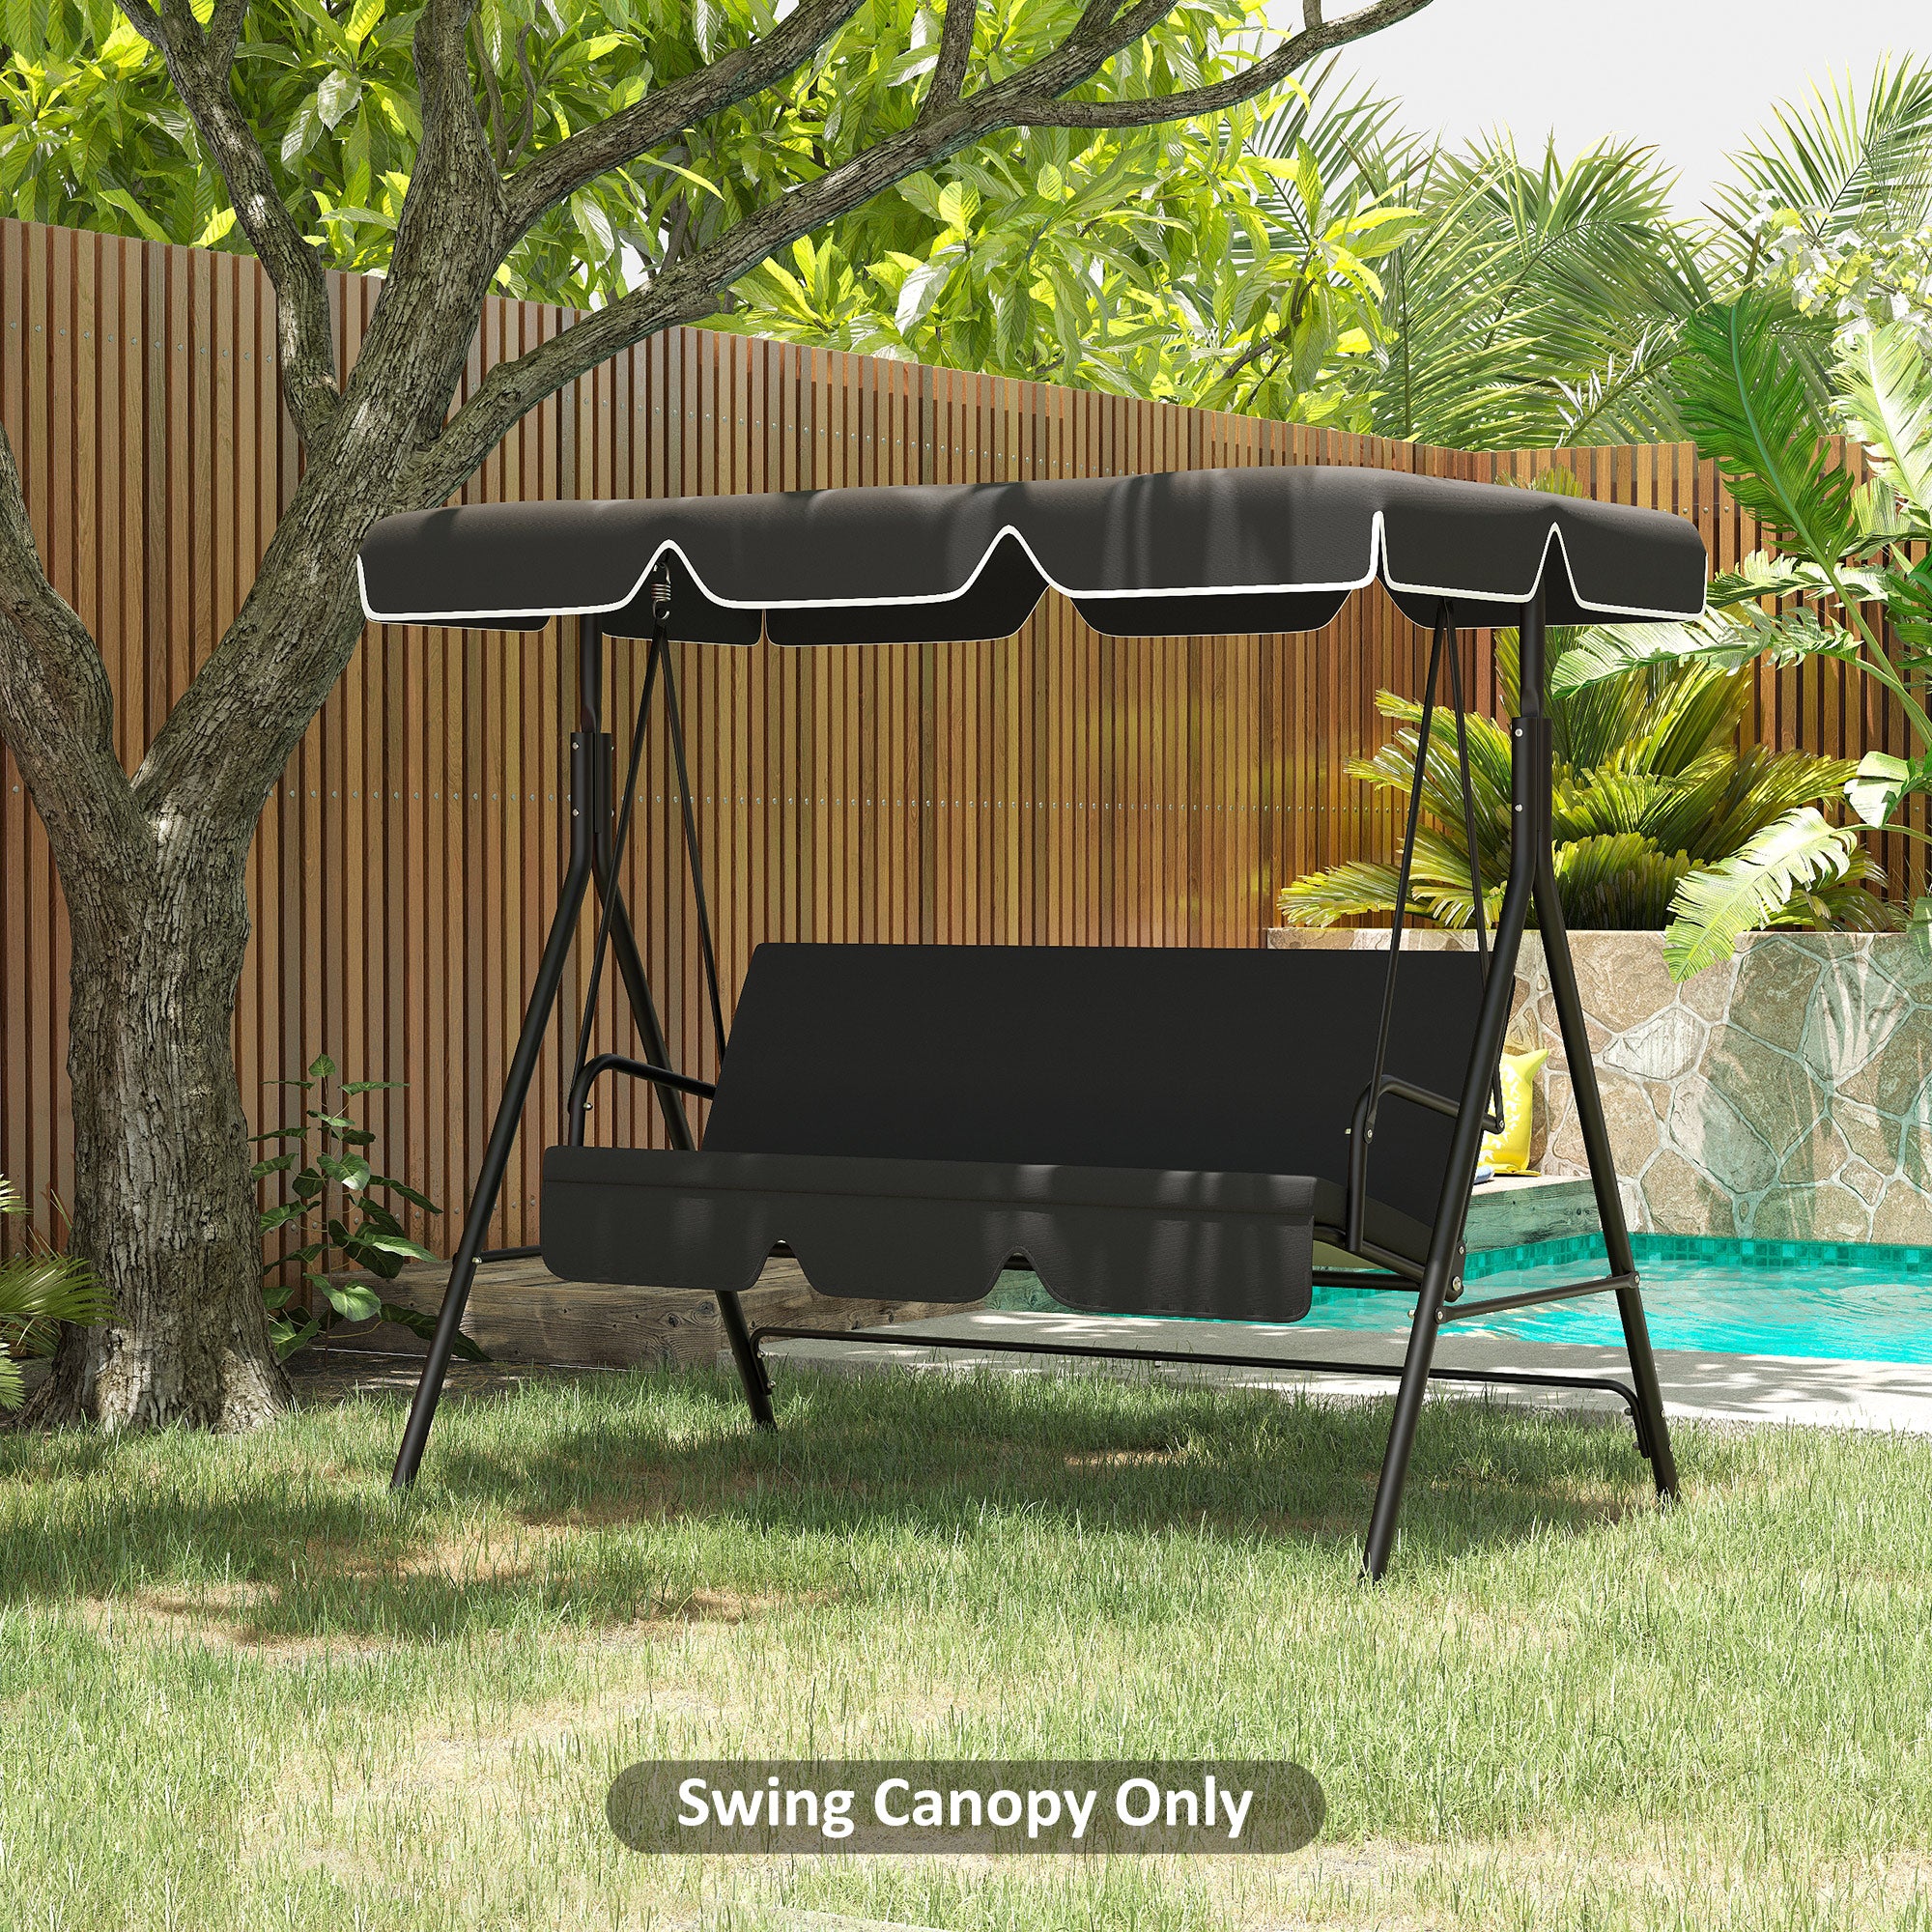 Outsunny 2 Seater Garden Swing Canopy Replacement Cover, UV50+ Sun Shade (Canopy Only), Black